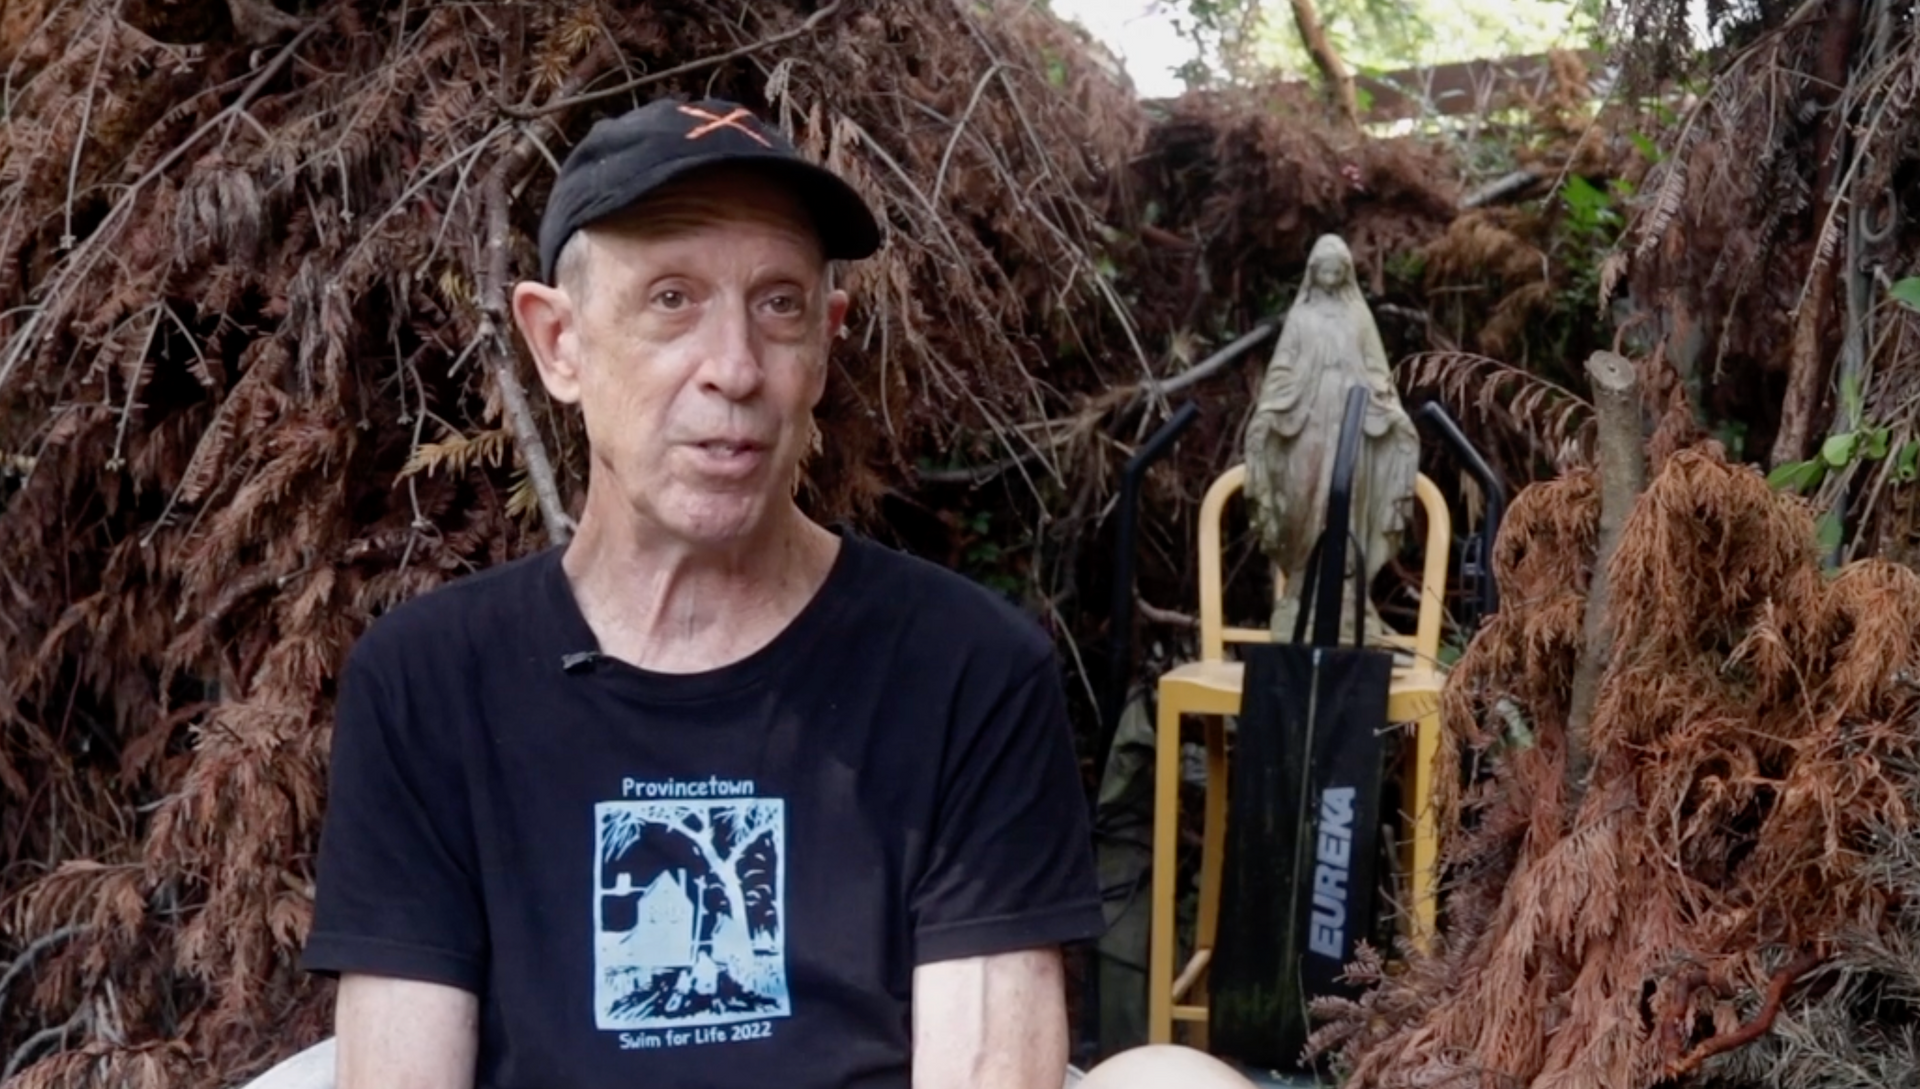 Artist, activist, and writer Jay Critchley in his backyard art space in Provincetown